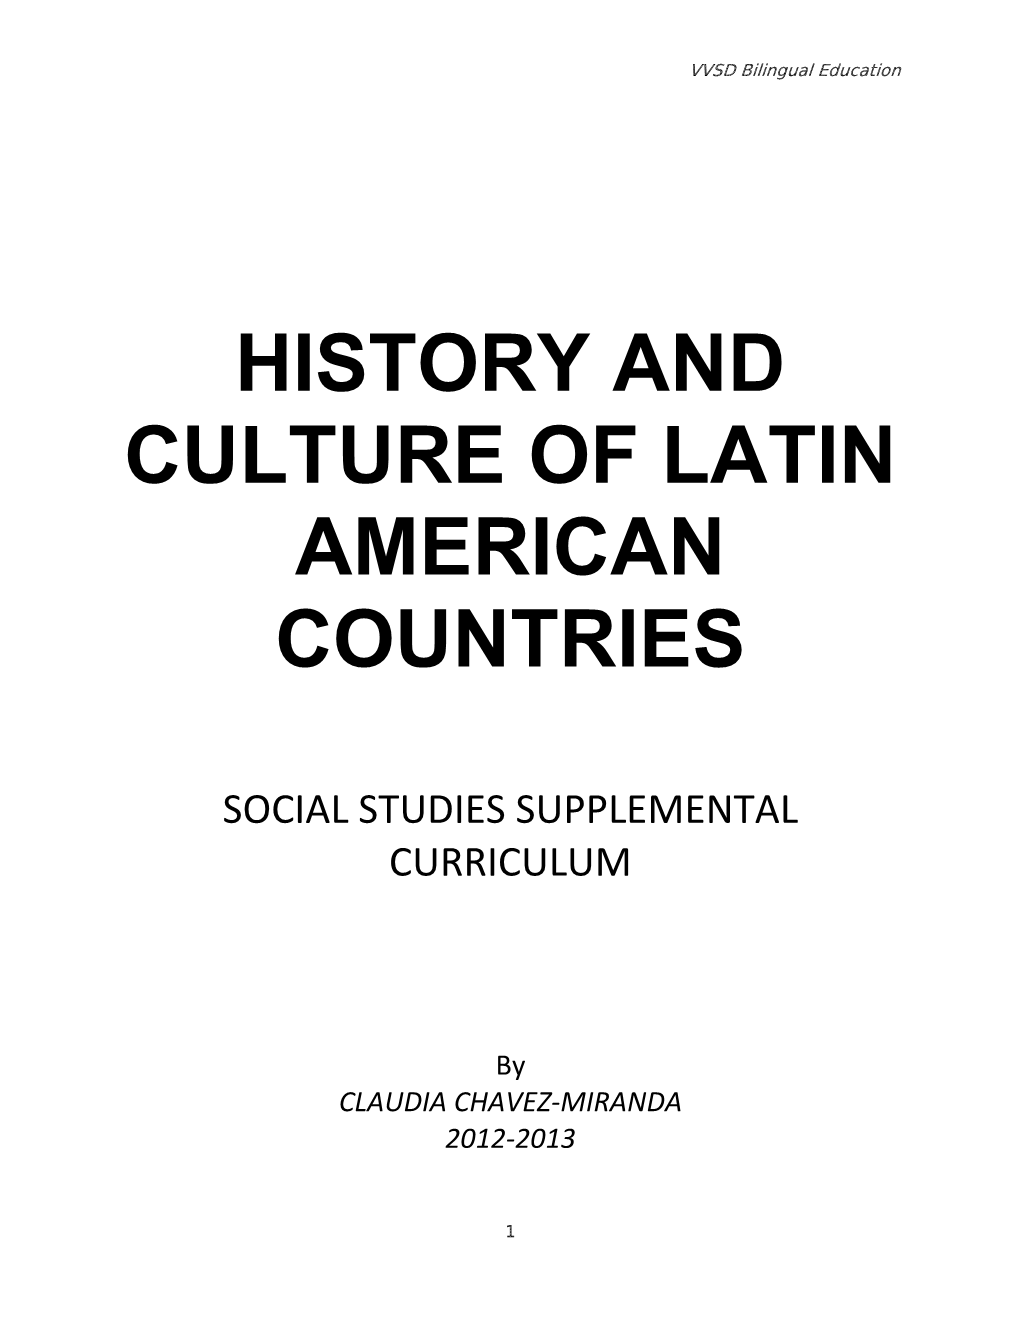 History and Culture of Latin American Countries